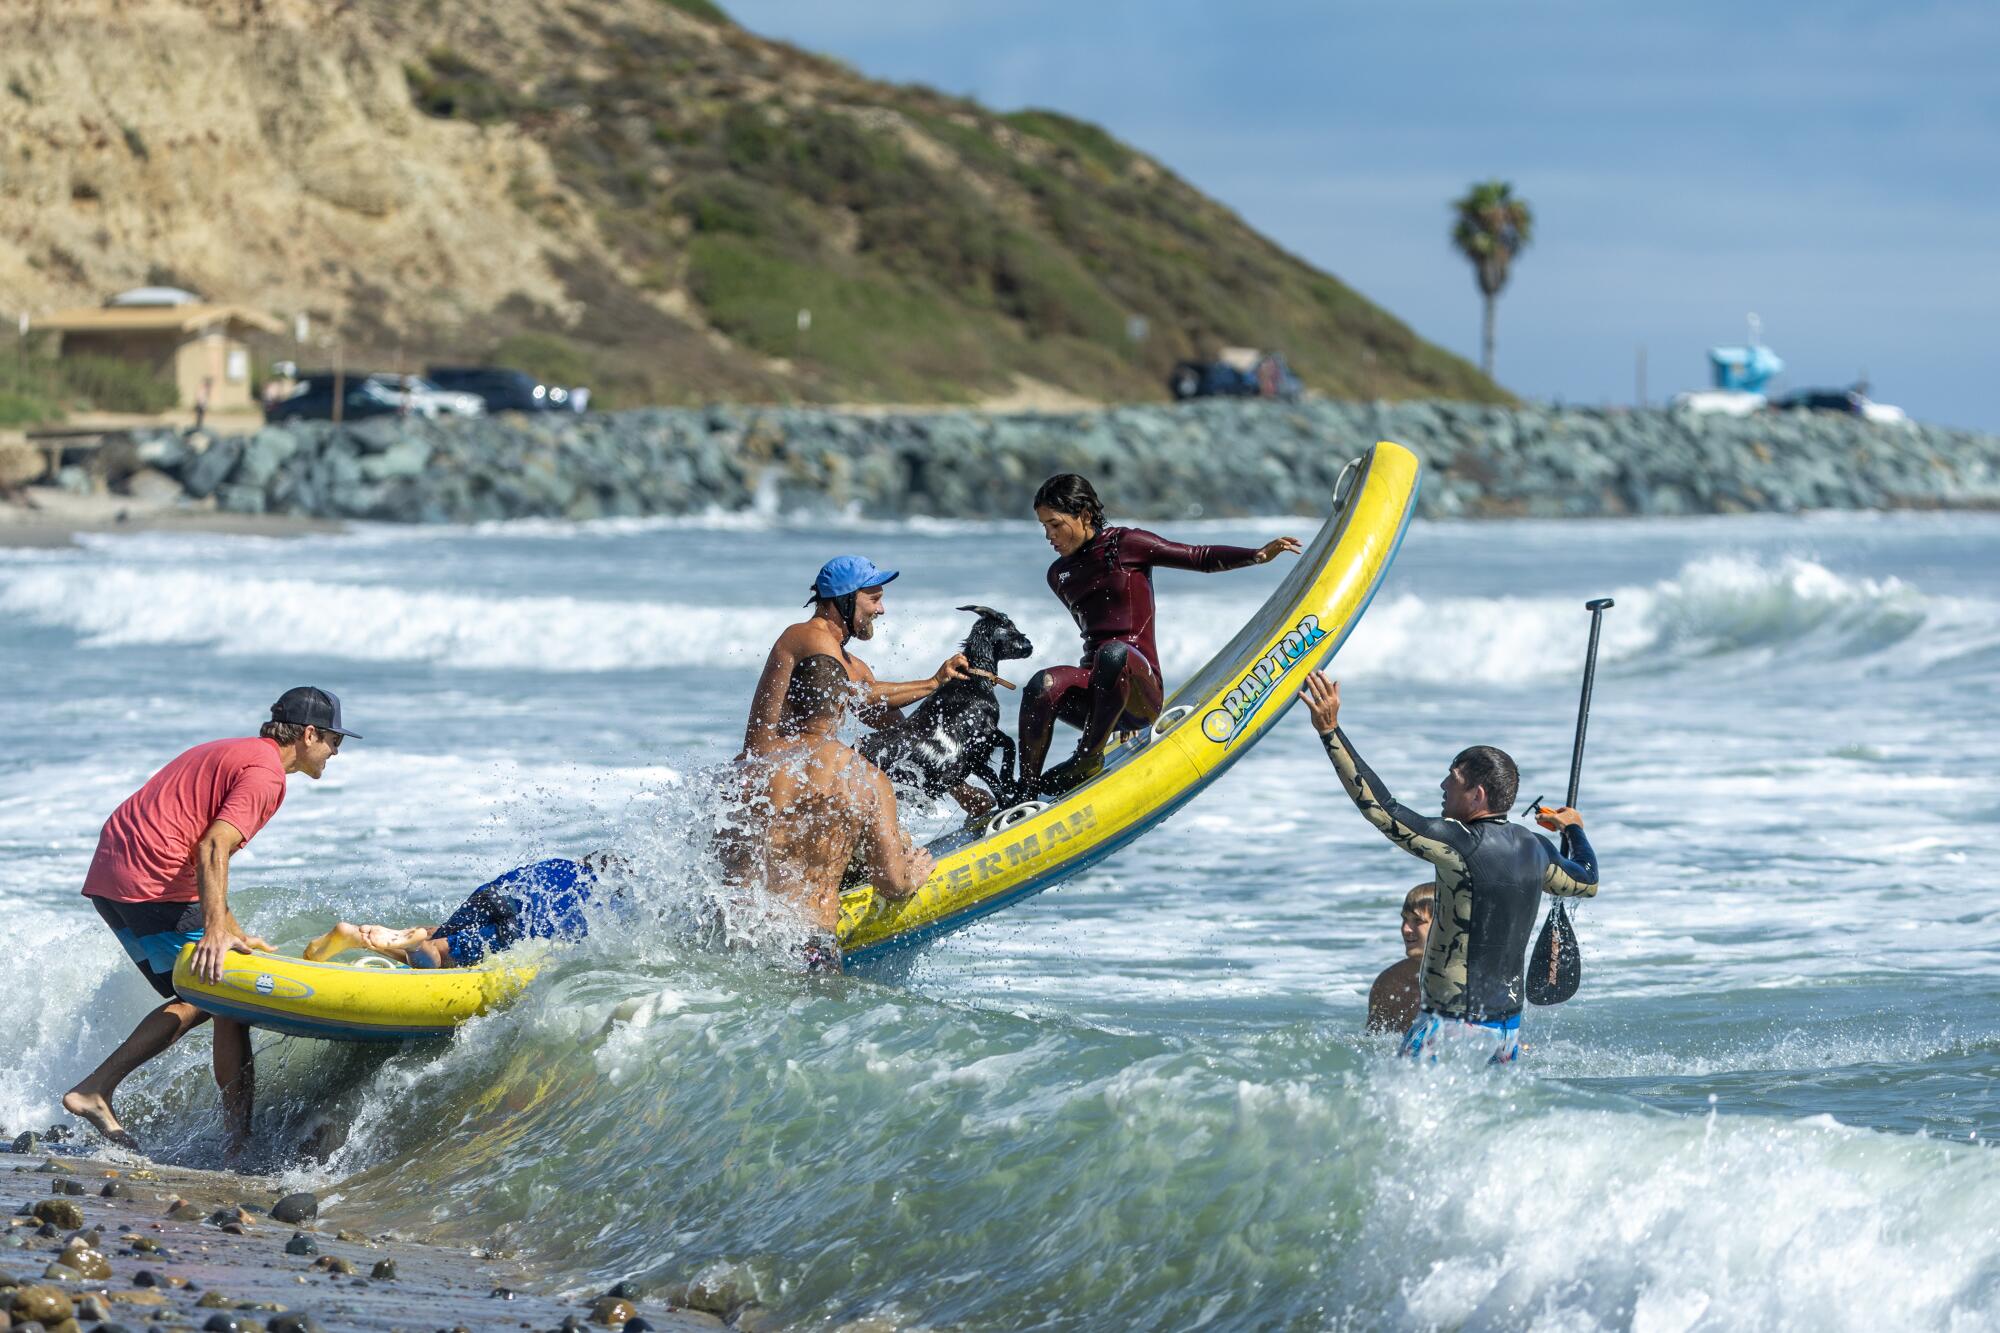 Dana McGregor owner of the Surfing Goats of Pismo Beach, joins friends surfing.